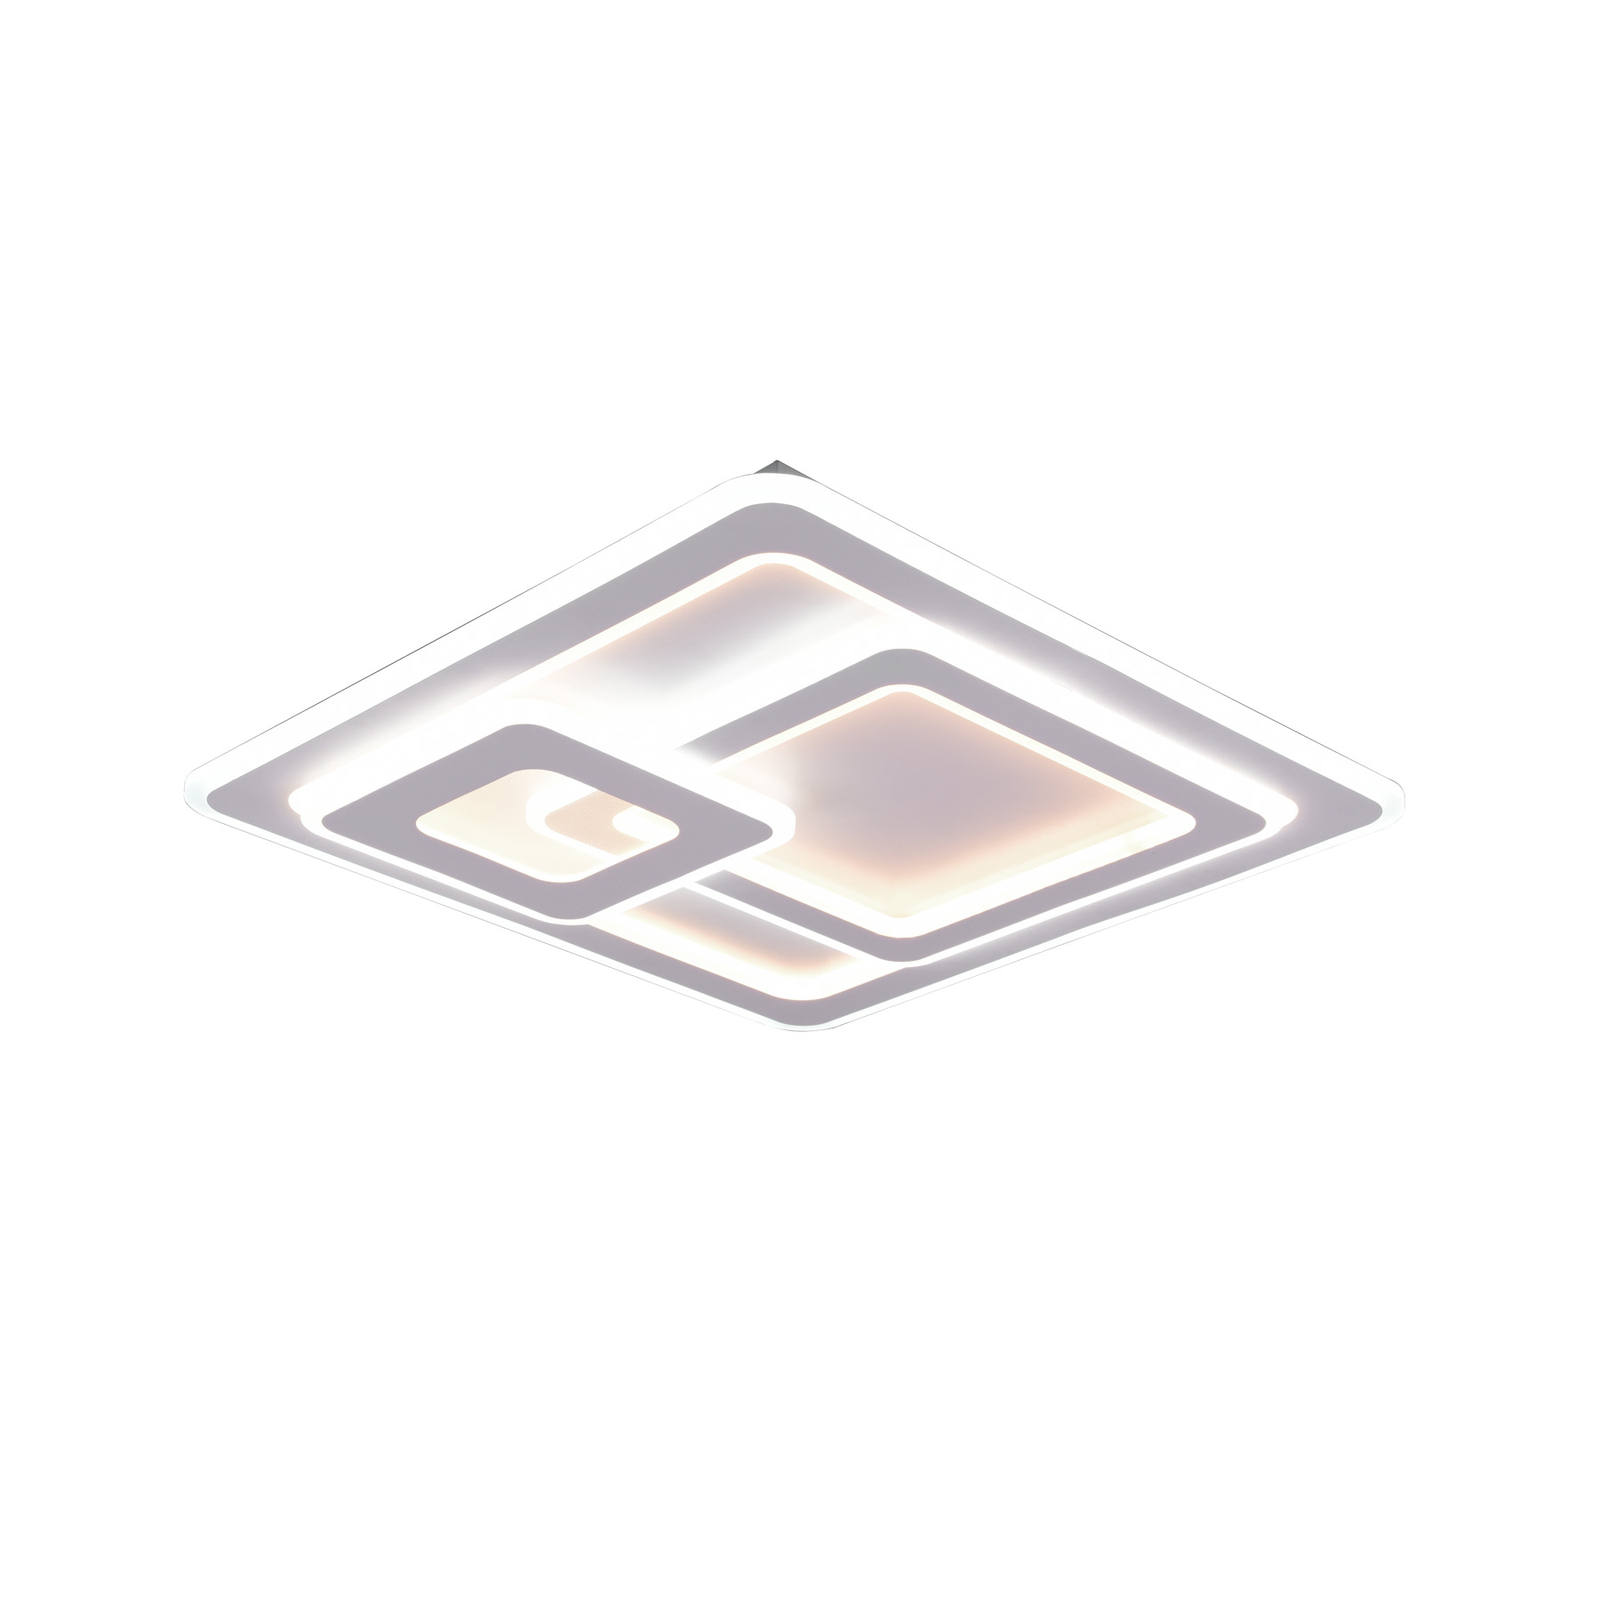 LED ceiling lamp Mita with remote control, CCT, angular